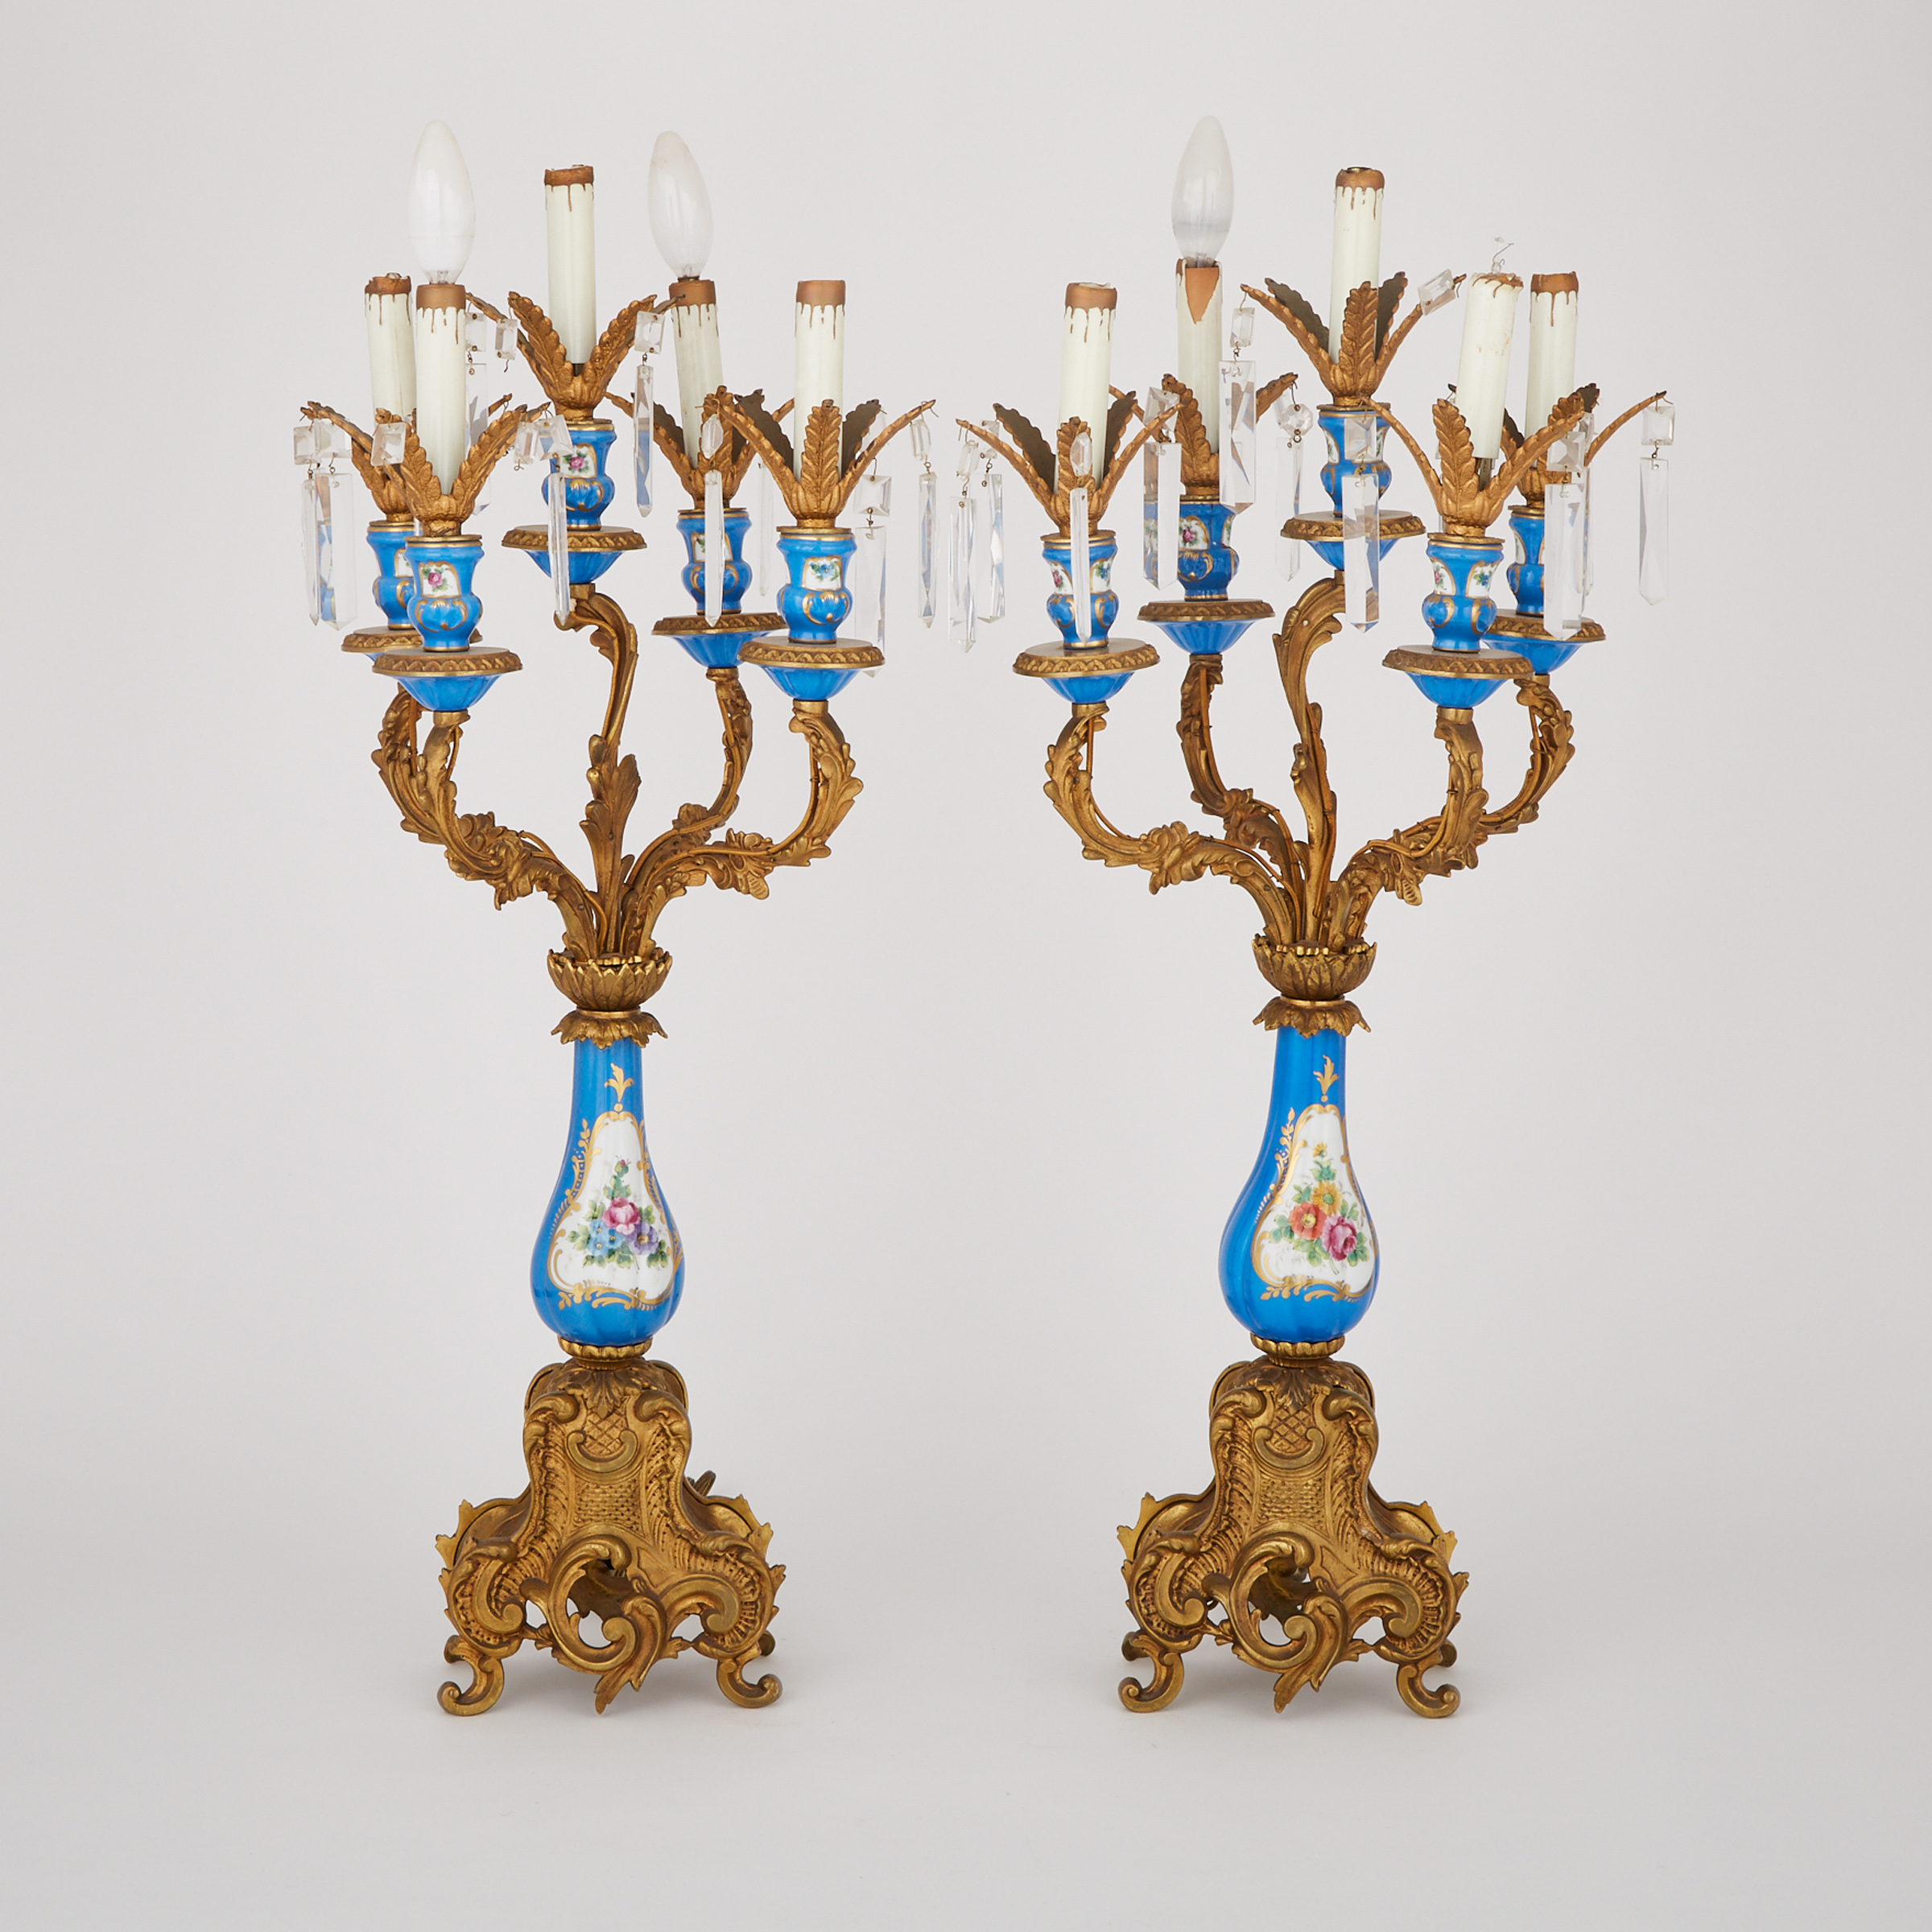 Pair French Sevres Style Porcelain Mounted Ormolu Five-Light Candelabra, mid 20th century